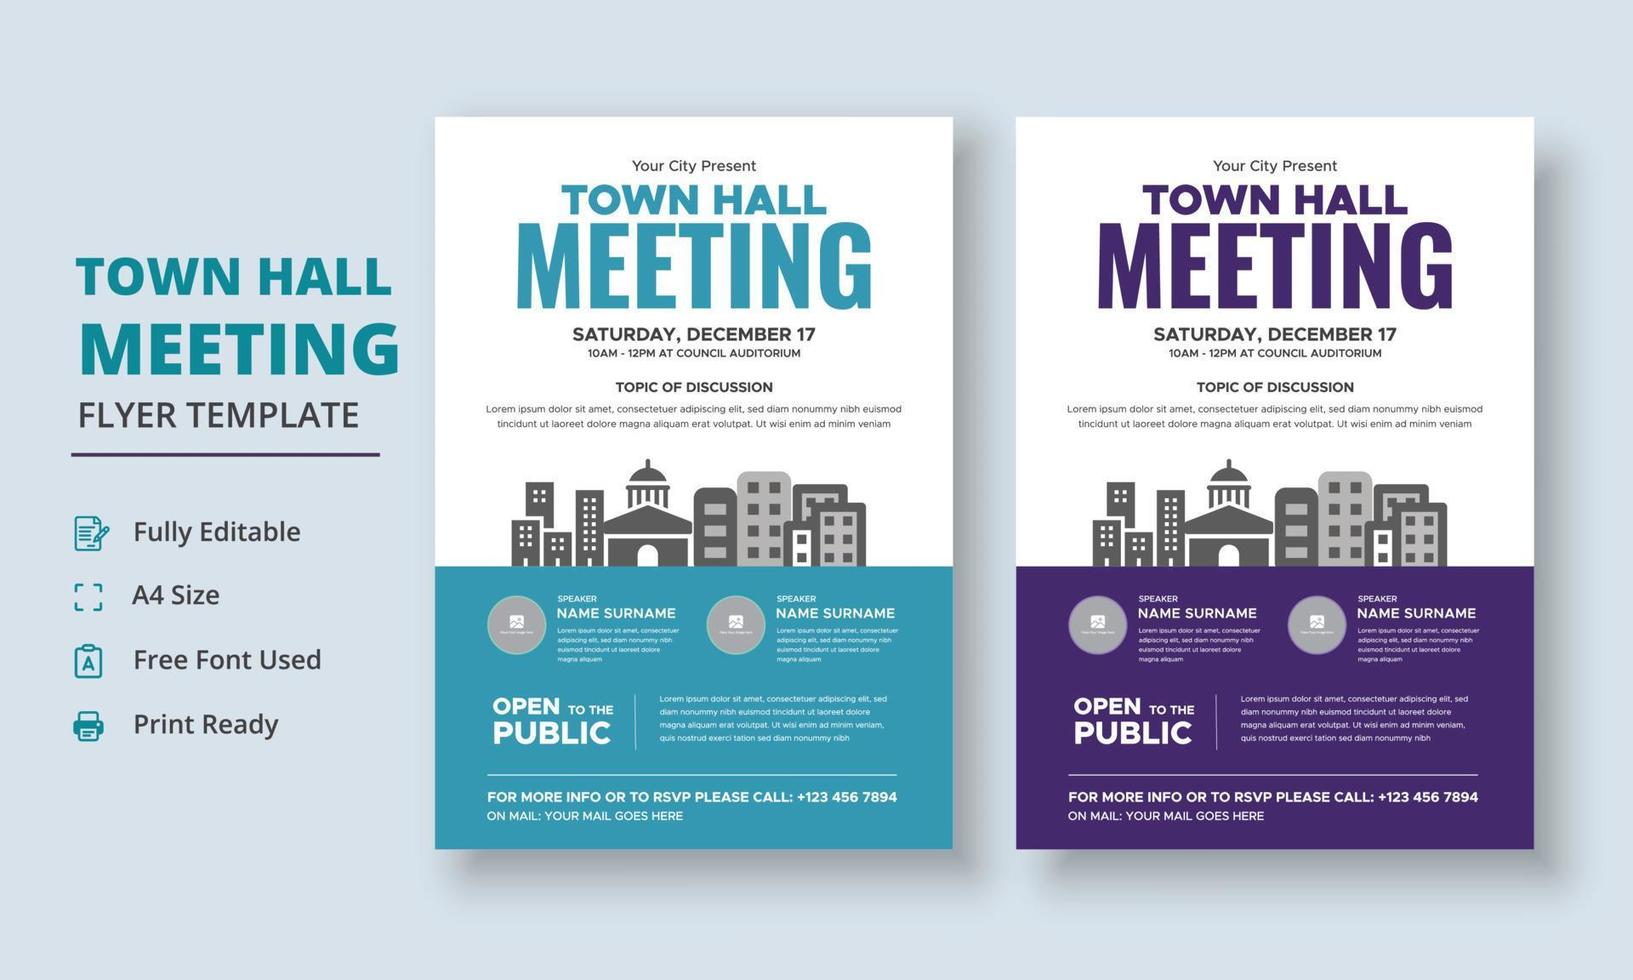 Town Hall Meeting Flyer Template, Community Meeting Flyer Template, City Hall Flyer and Poster vector